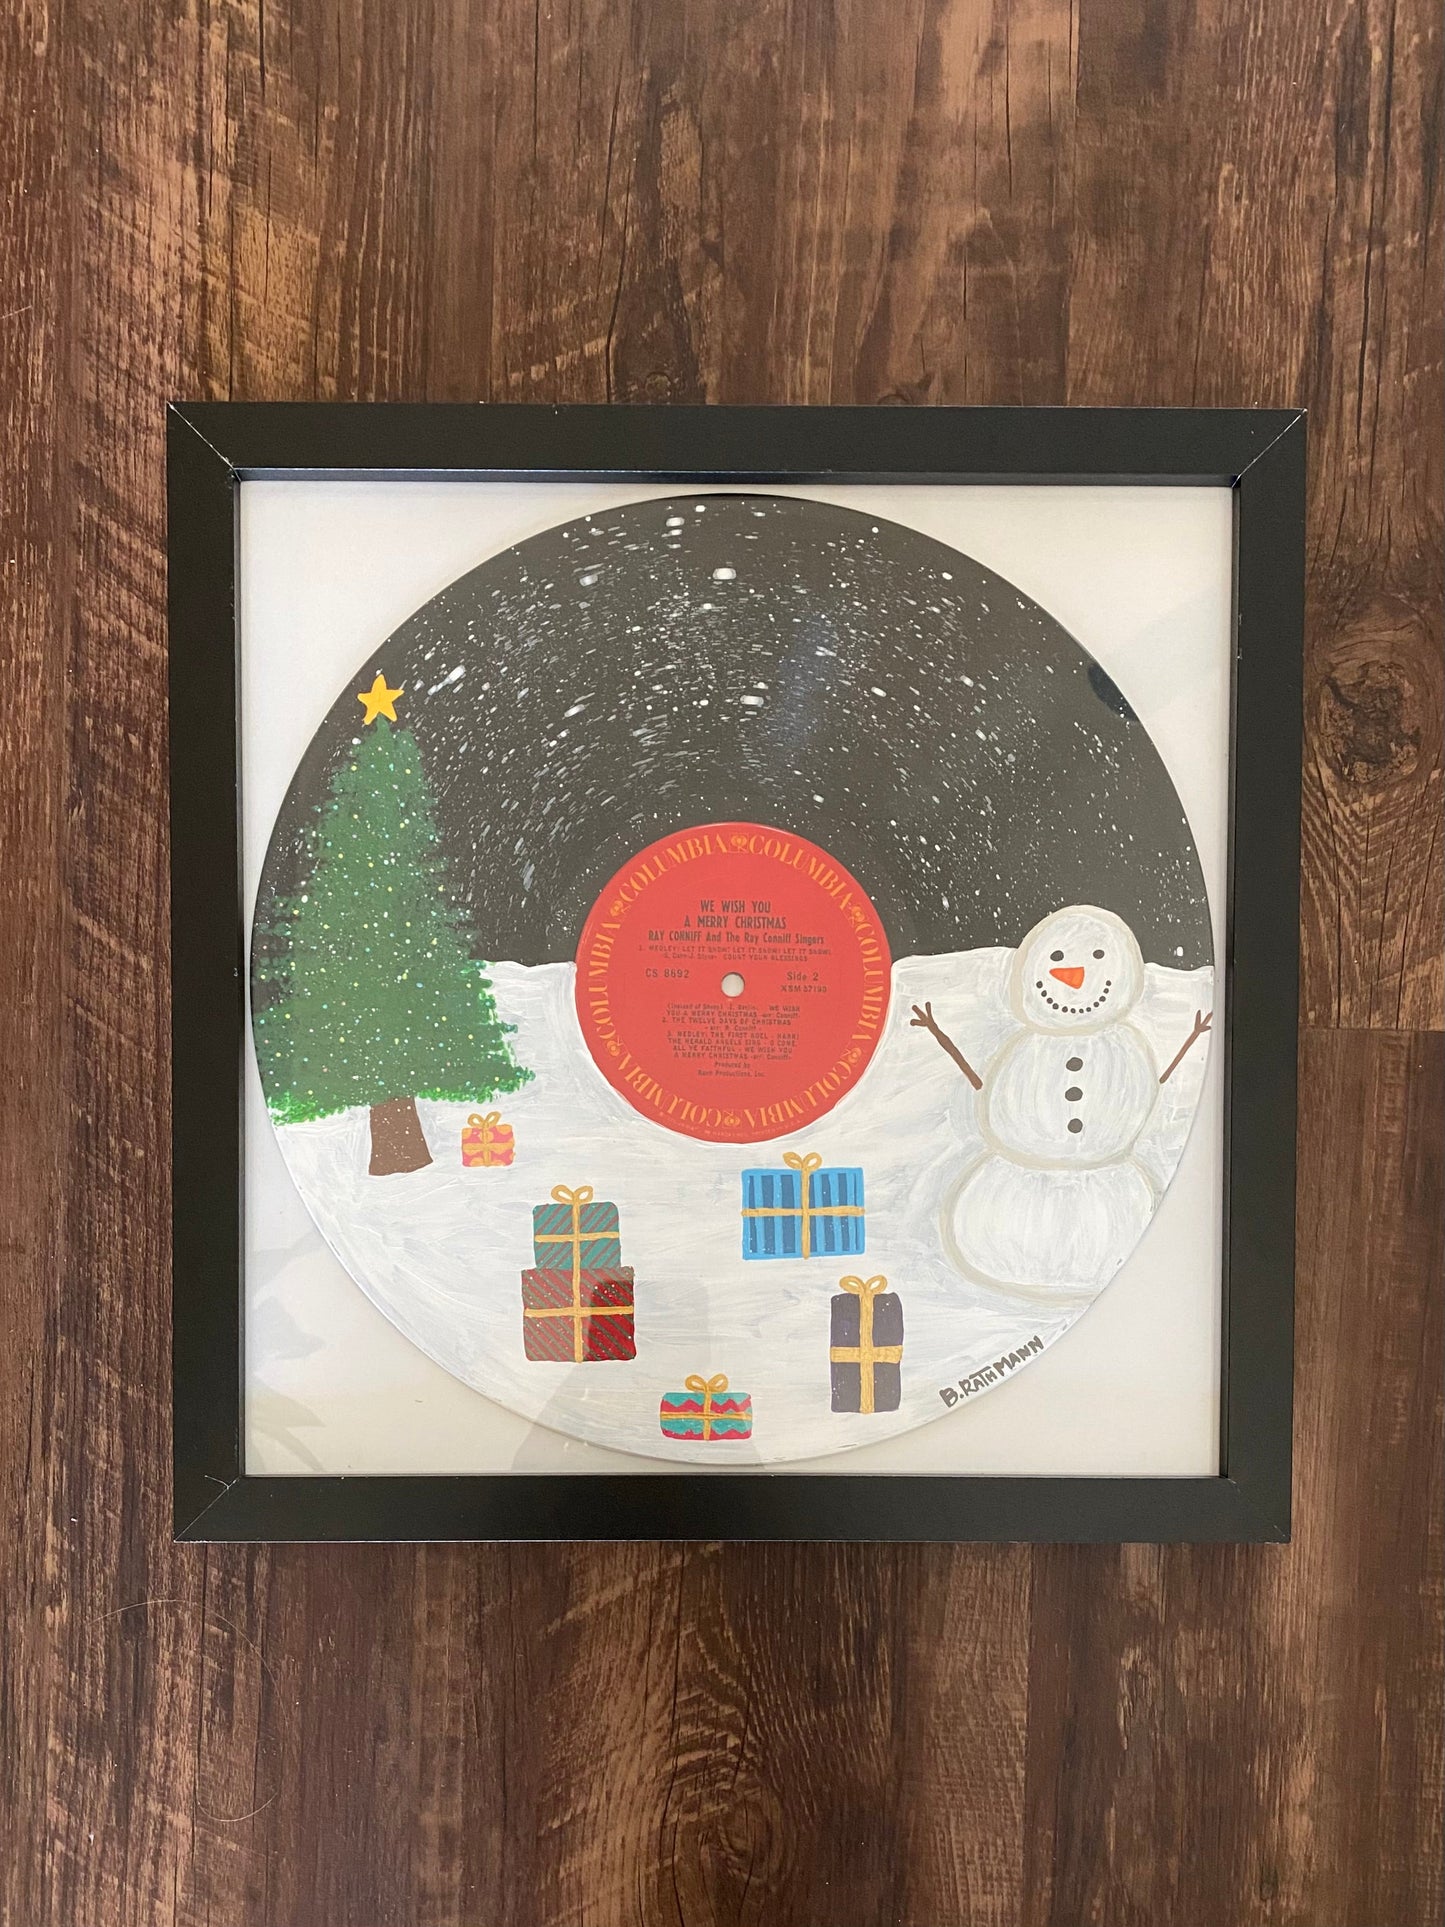 We Wish You a Merry Christmas  Record is an acrylic painting of a dreamy winter wonderland with a snowman and a Christmas tree! This original painting is perfect for any space. This work was done on a repurposed vinyl record bought at a local thrift store. This was inspired by the music listed on the vinyl album. The frame is included with purchase.